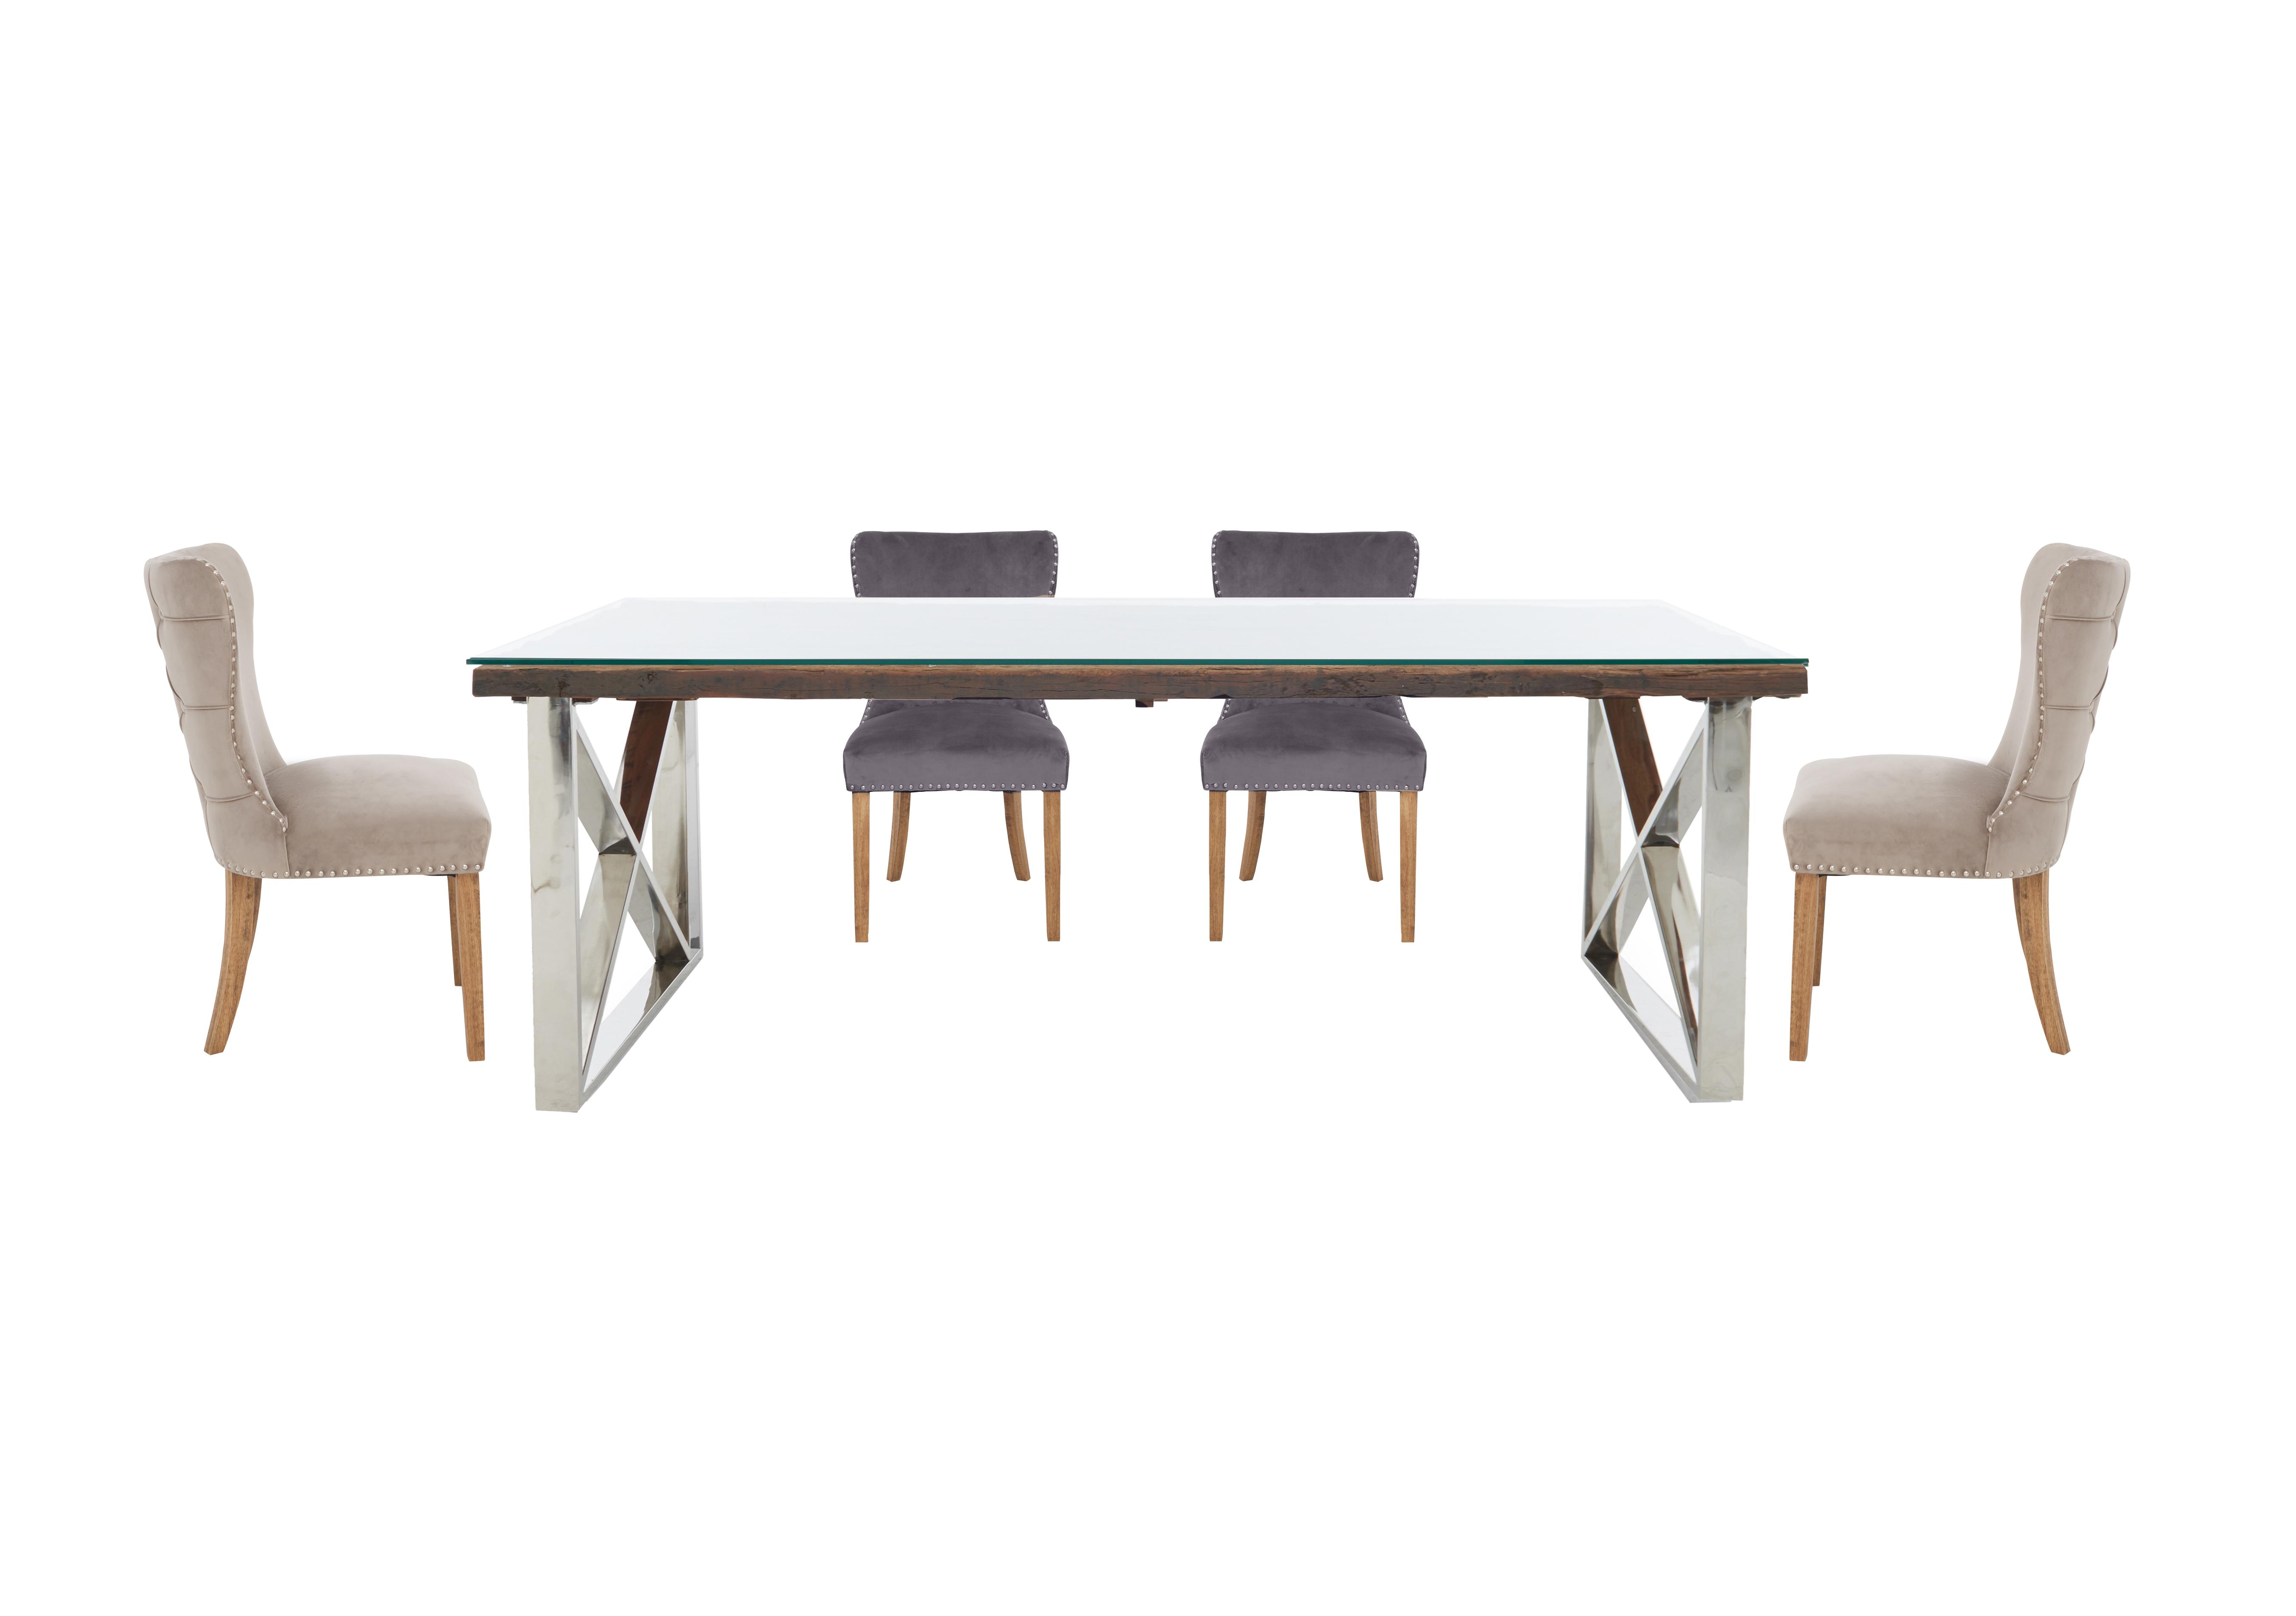 Chennai Dining Table with X-Leg Base and 4 Luxe Dining Chairs in Grey / Taupe on Furniture Village